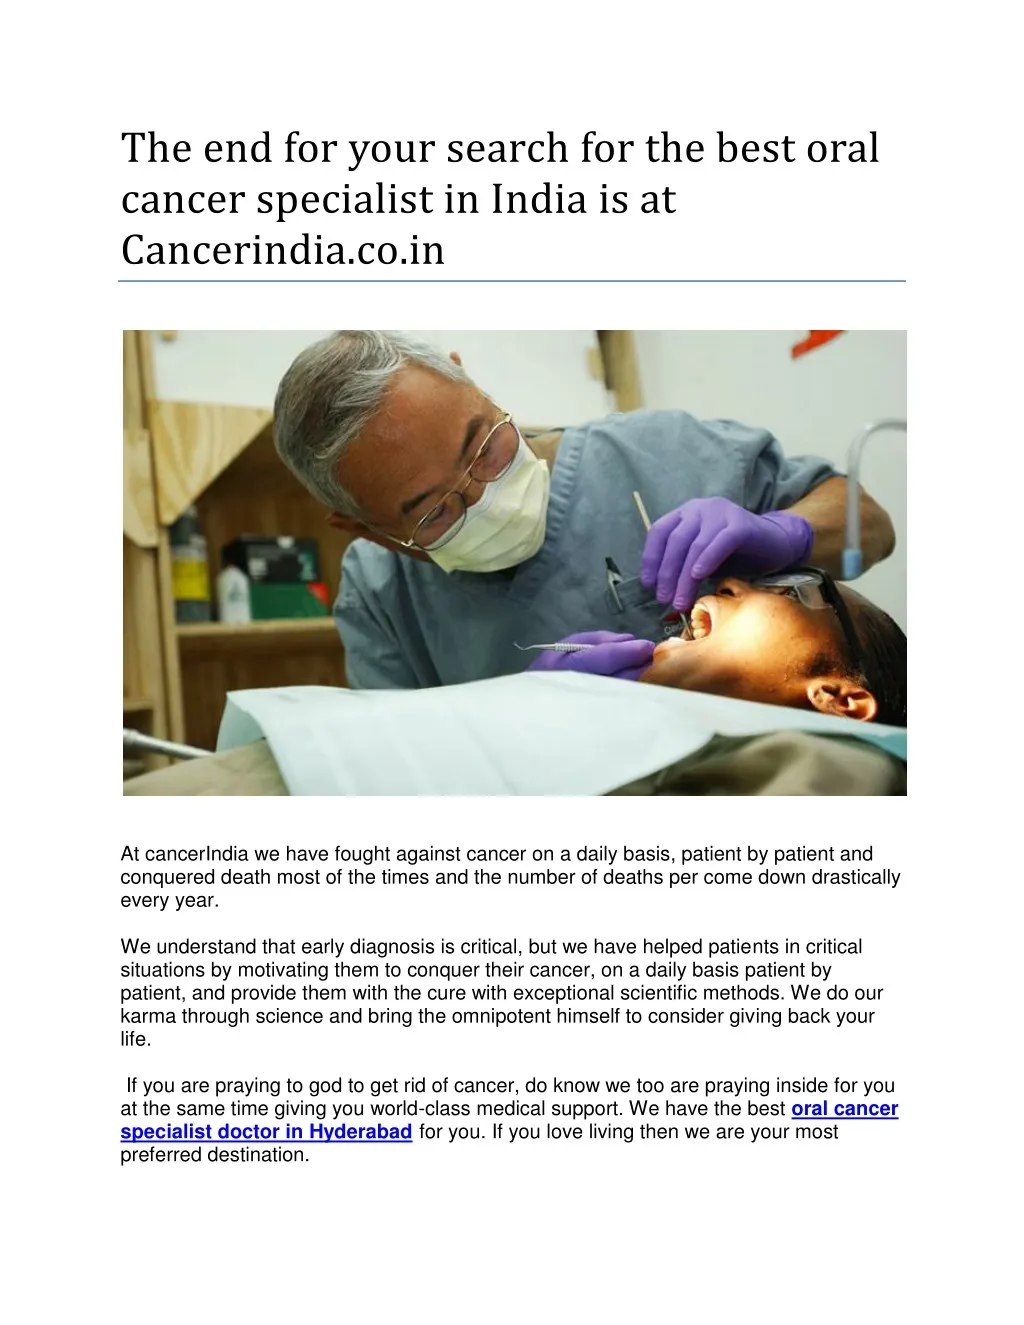 the end for your search for the best oral cancer